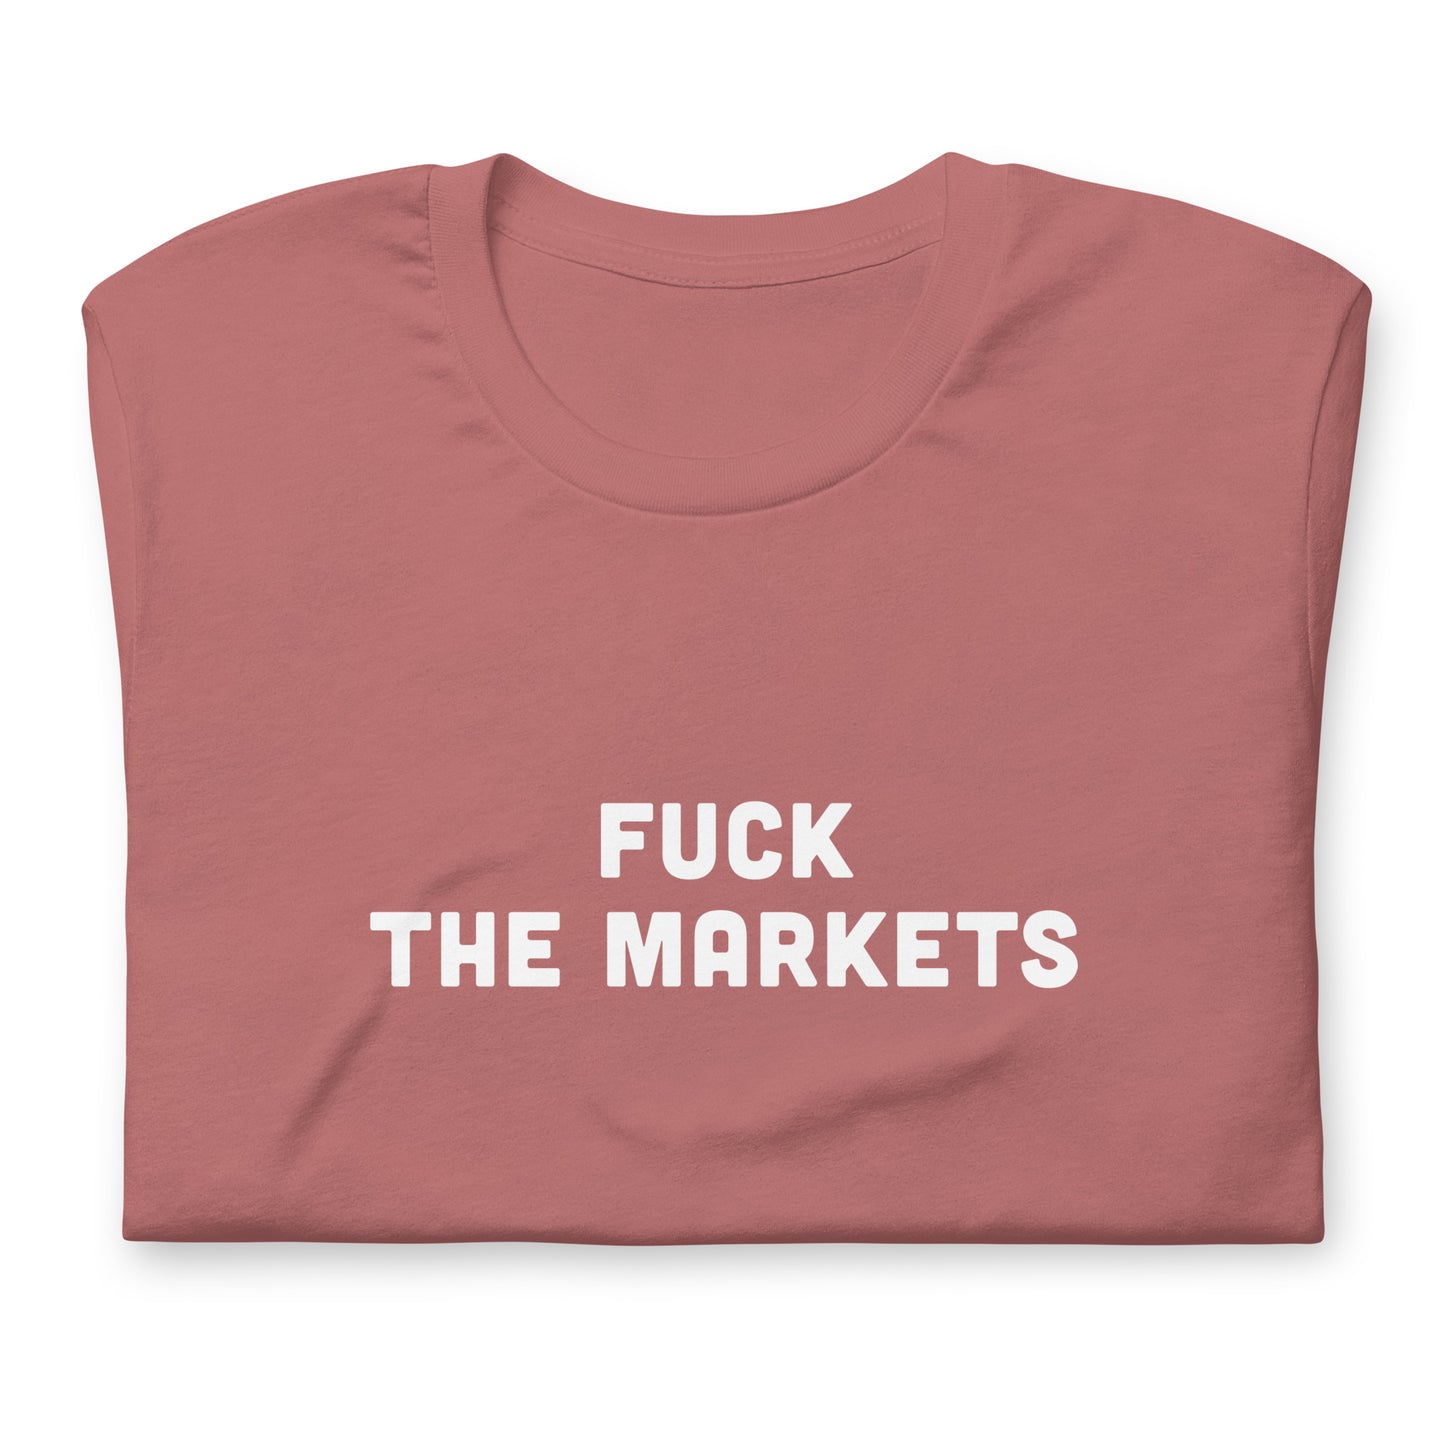 Fuck The Markets T-Shirt Size XL Color Navy